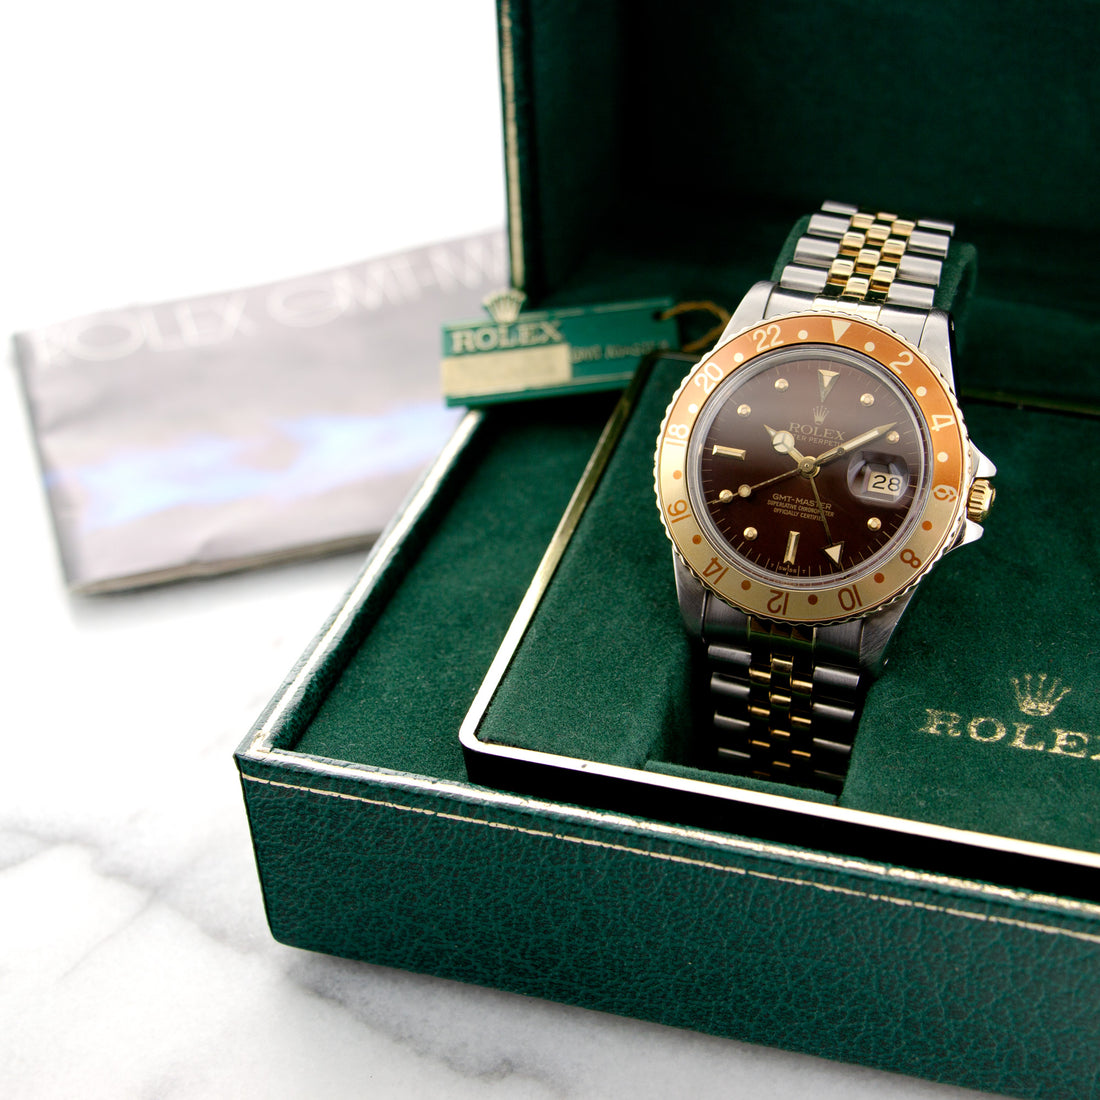 Rolex Two-Tone GMT-Master Root Beer Watch, With Original Box, Hangtag and Manual